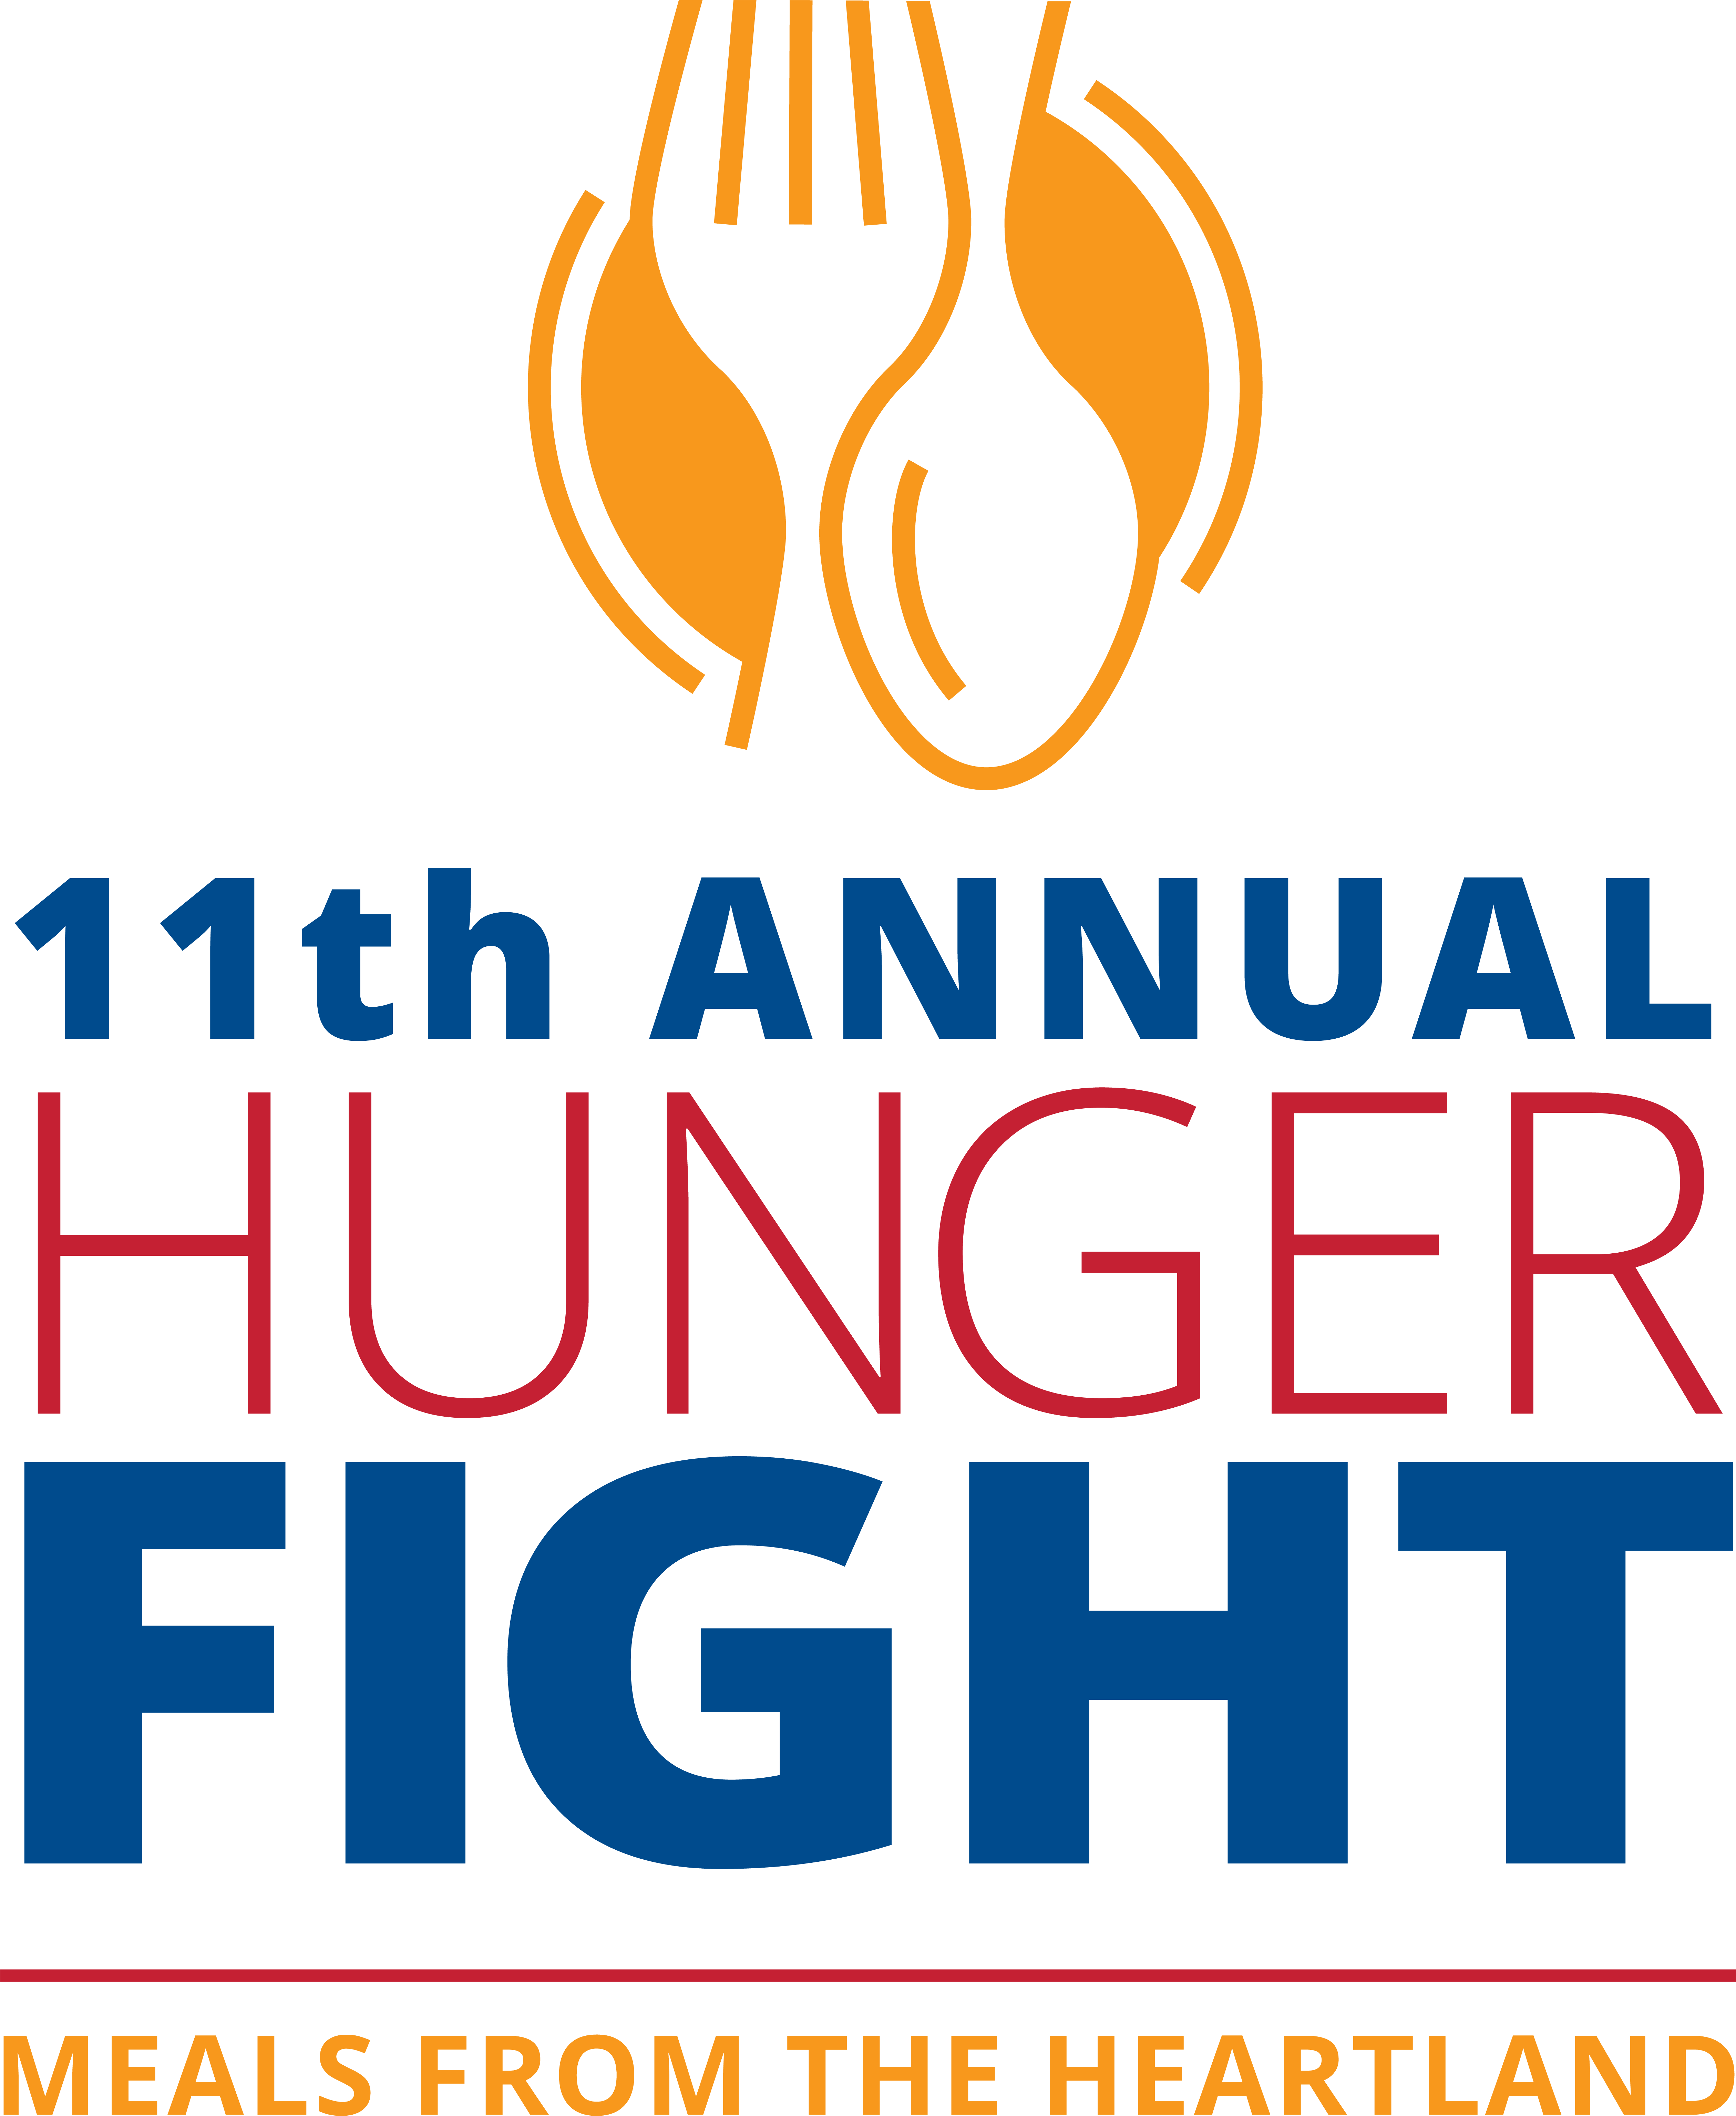 Heartland Logo - 11th Annual Hunger Fight Logo - Meals from the Heartland